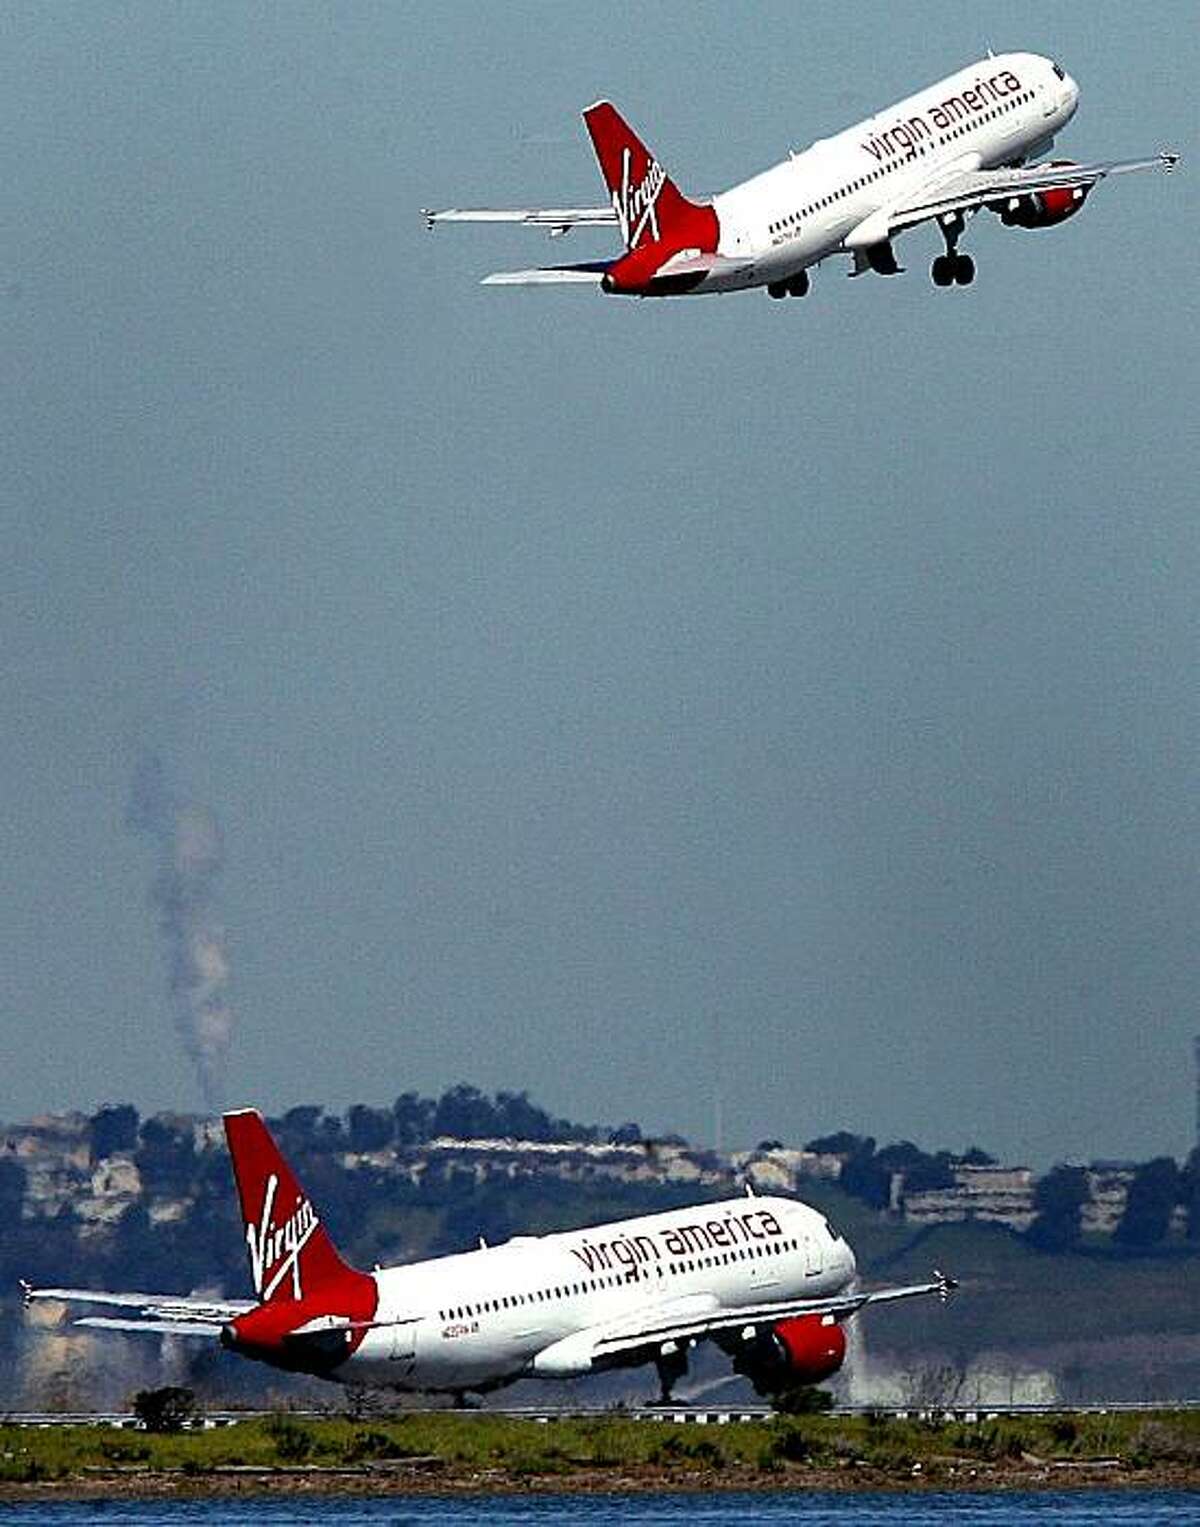 Virgin America airplanes take off from the San Francisco International Airport near Millbrae, Calif. on Tuesday March 10, 2009.